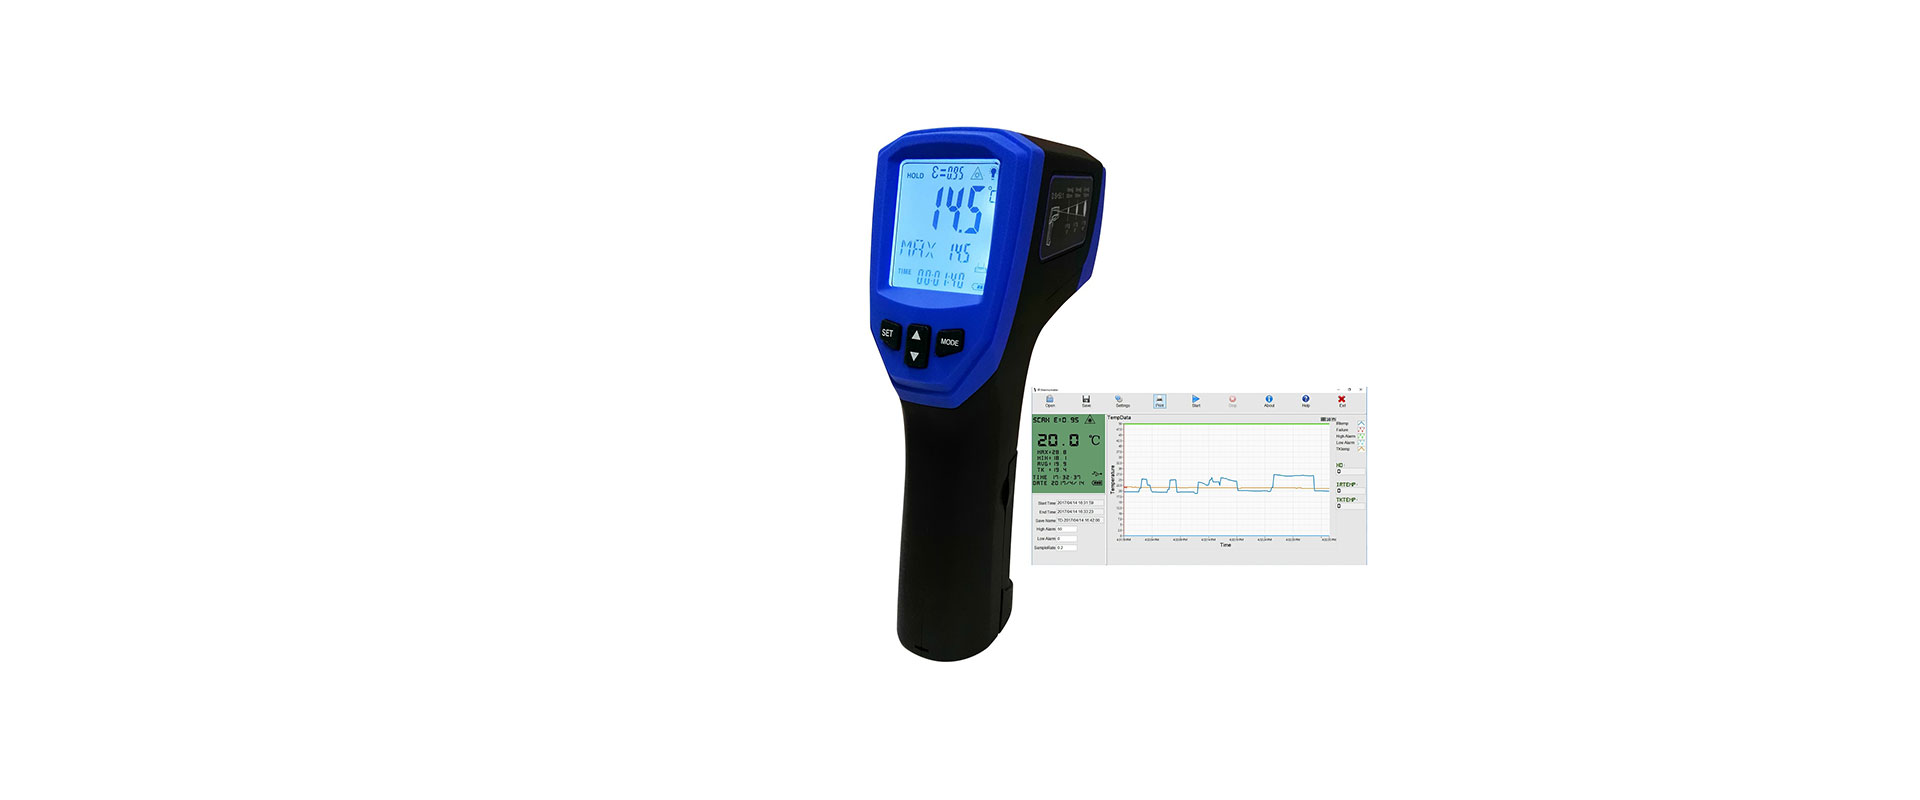 Introducing the professional digital high temperature infrared and thermocouple thermometer data logger